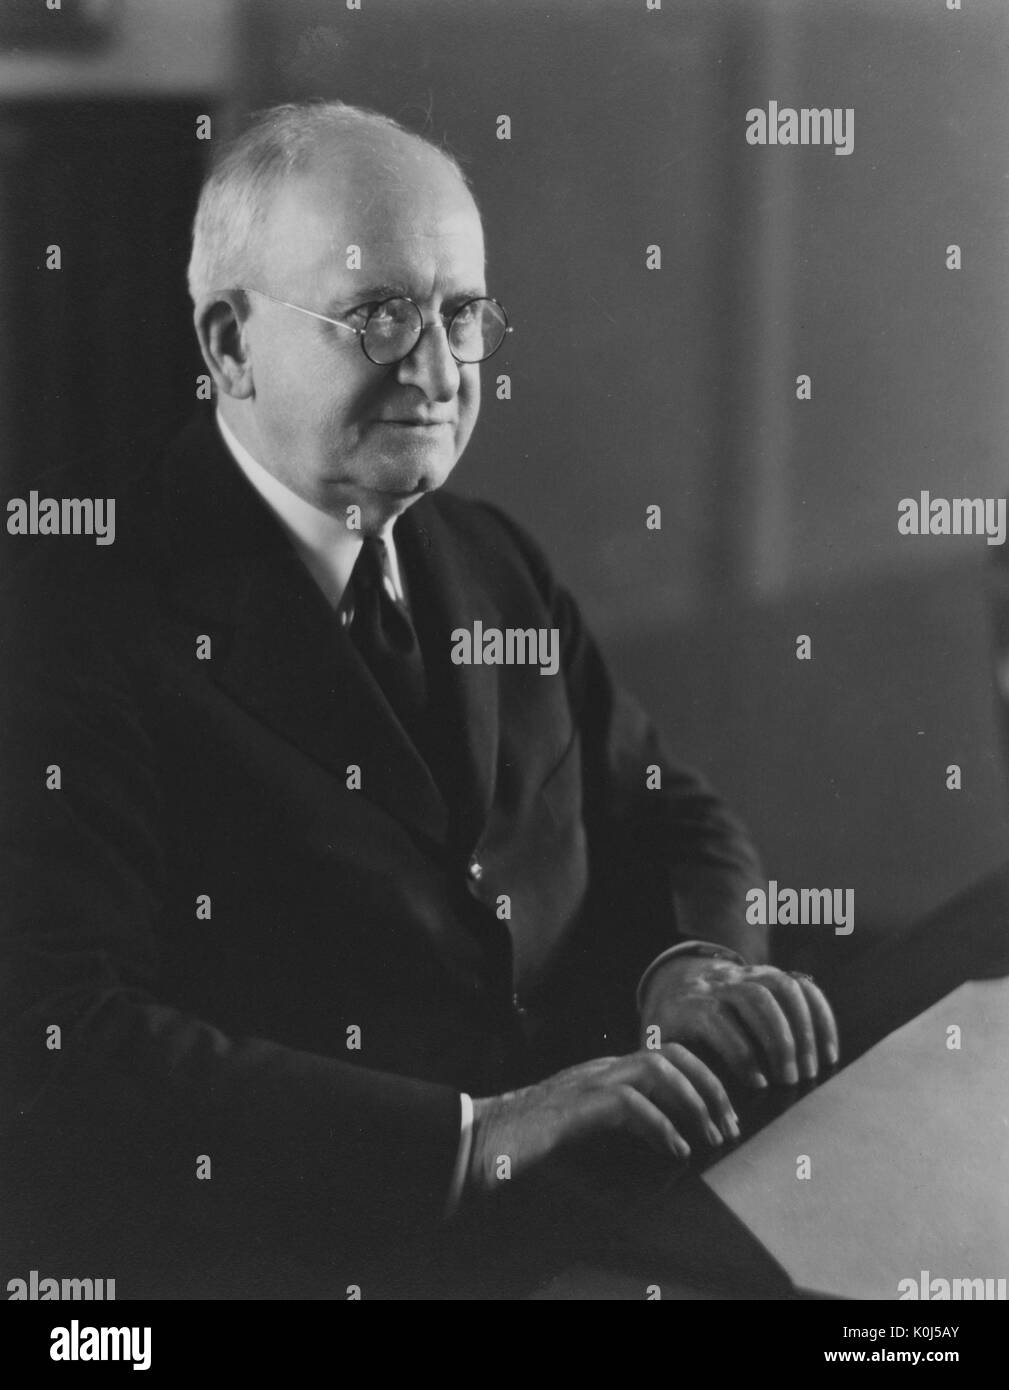 Half-length seated portrait of American physicist Joseph Sweetman Ames, who was professor, provost, then president at the Johns Hopkins University. 1935. Stock Photo